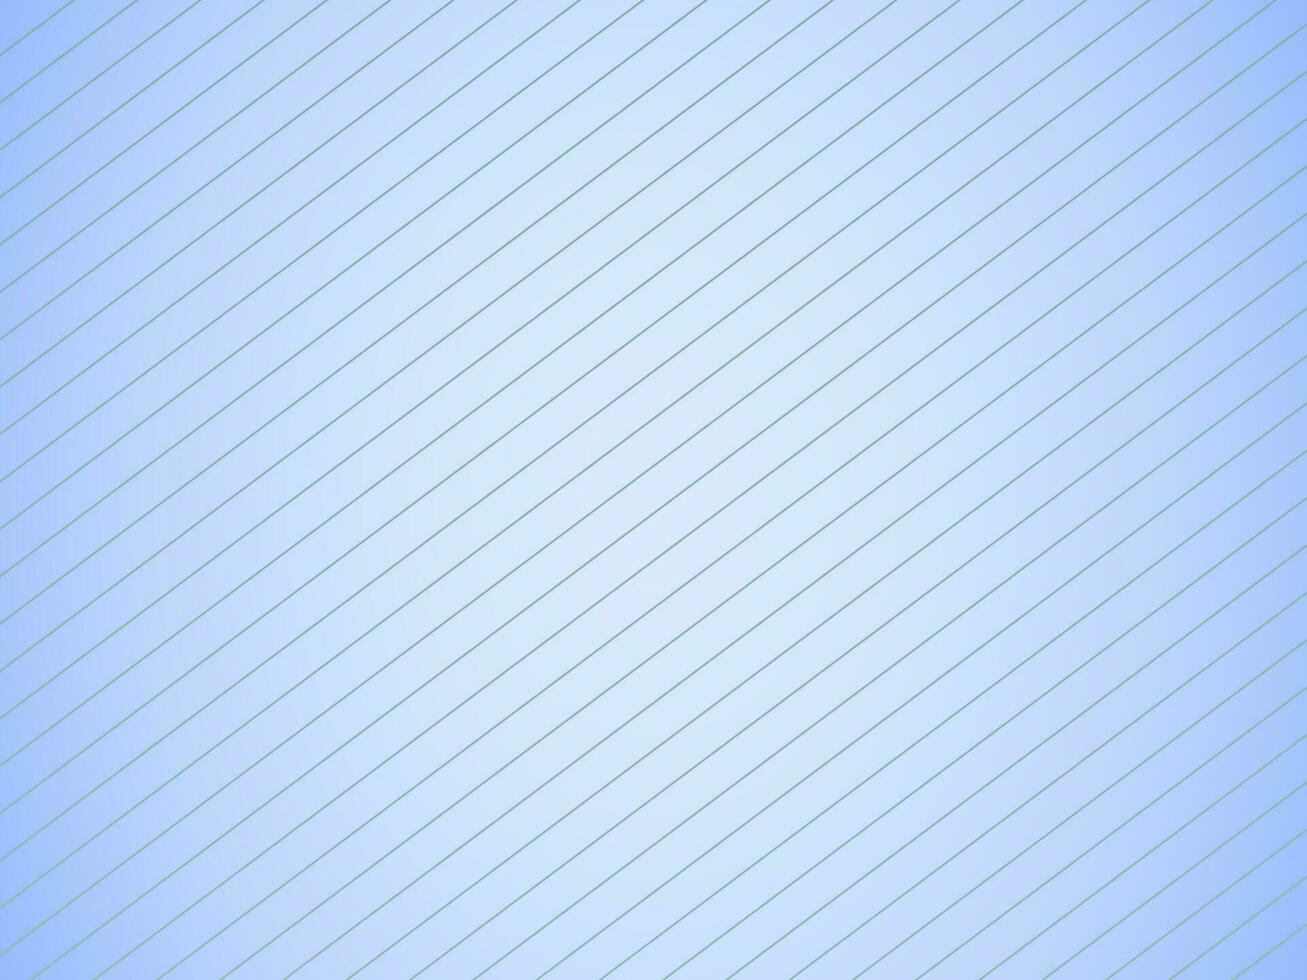 Shiny abstract background with diagonal lines in sky blue color. vector